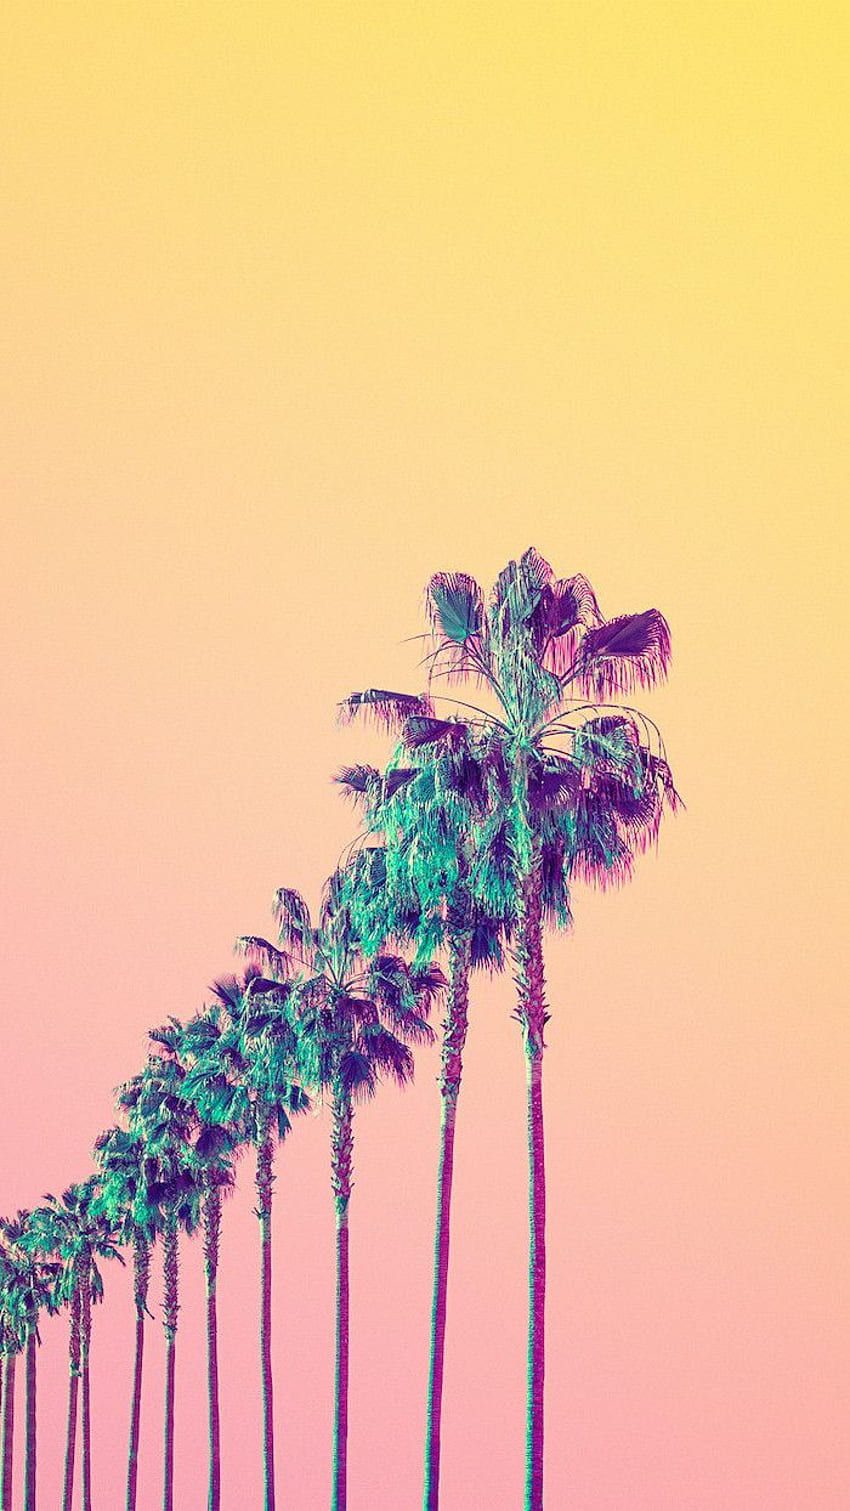 Aesthetic image of a row of palm trees with a pastel color gradient. - Palm tree, sky